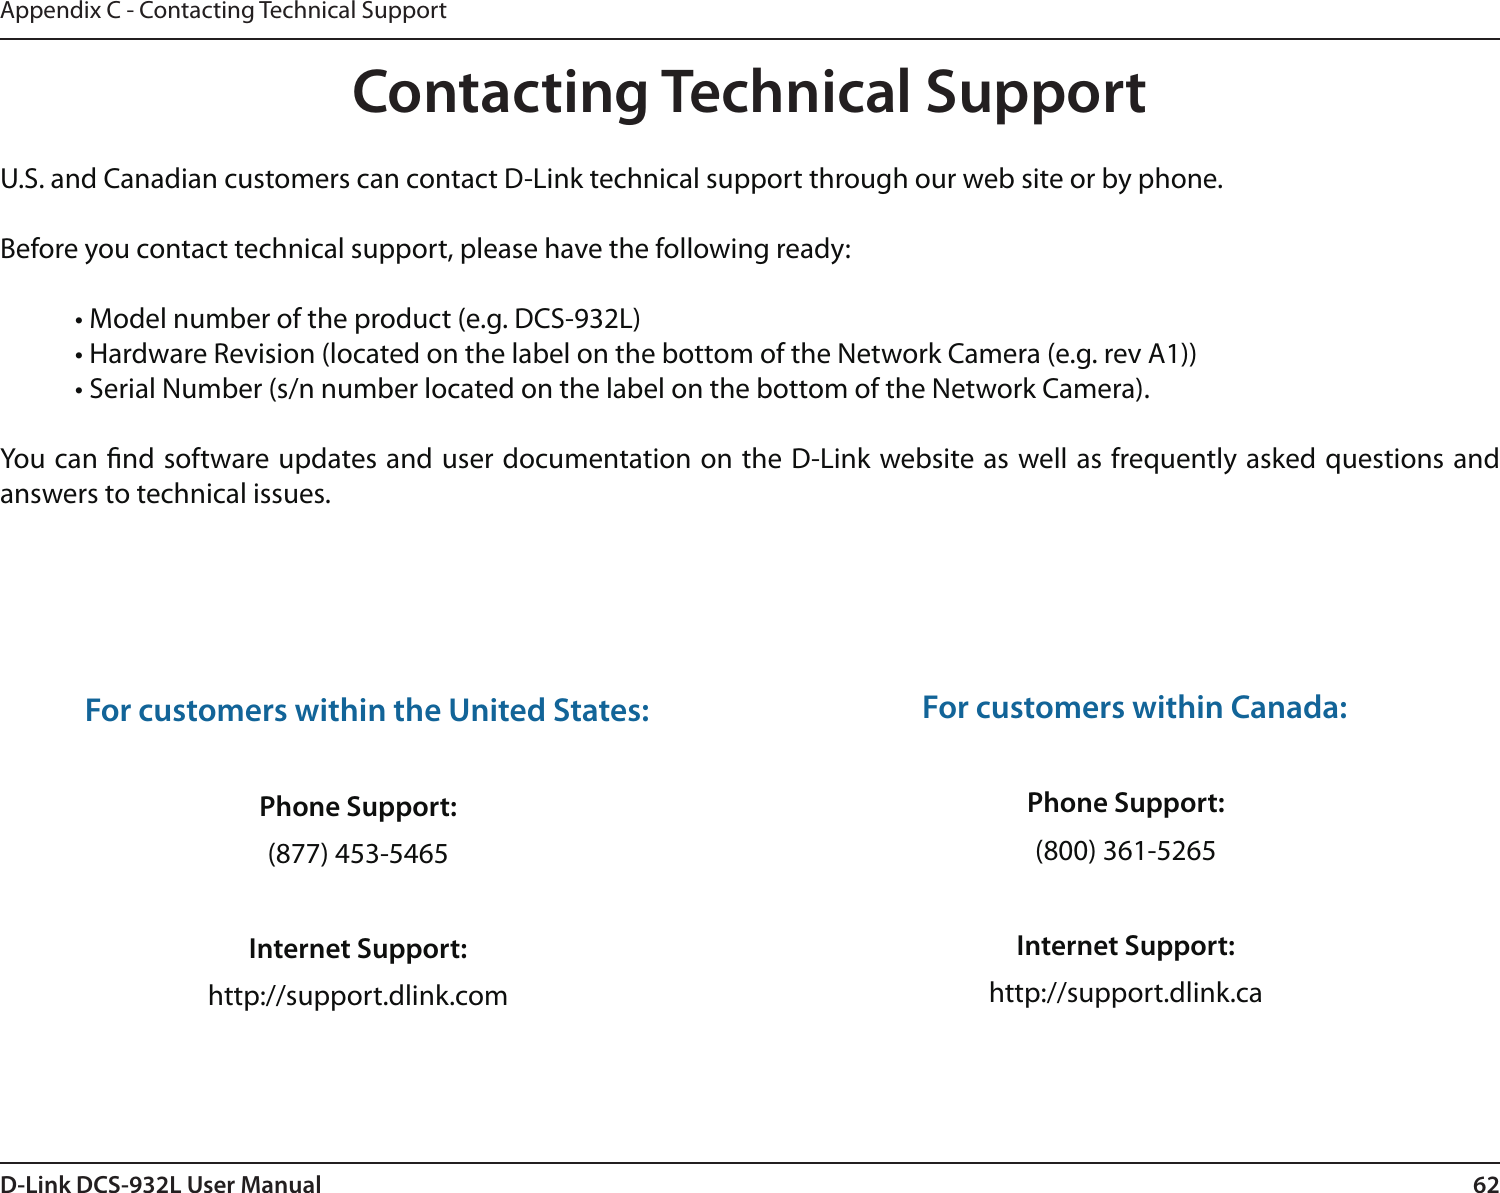 62D-Link DCS-932L User ManualAppendix C - Contacting Technical SupportContacting Technical SupportU.S. and Canadian customers can contact D-Link technical support through our web site or by phone.Before you contact technical support, please have the following ready:  • Model number of the product (e.g. DCS-932L)  • Hardware Revision (located on the label on the bottom of the Network Camera (e.g. rev A1))  • Serial Number (s/n number located on the label on the bottom of the Network Camera). You can nd software updates and user documentation on the D-Link website as well as frequently asked questions and answers to technical issues.For customers within the United States: Phone Support:(877) 453-5465Internet Support:http://support.dlink.com For customers within Canada: Phone Support:(800) 361-5265 Internet Support:http://support.dlink.ca 